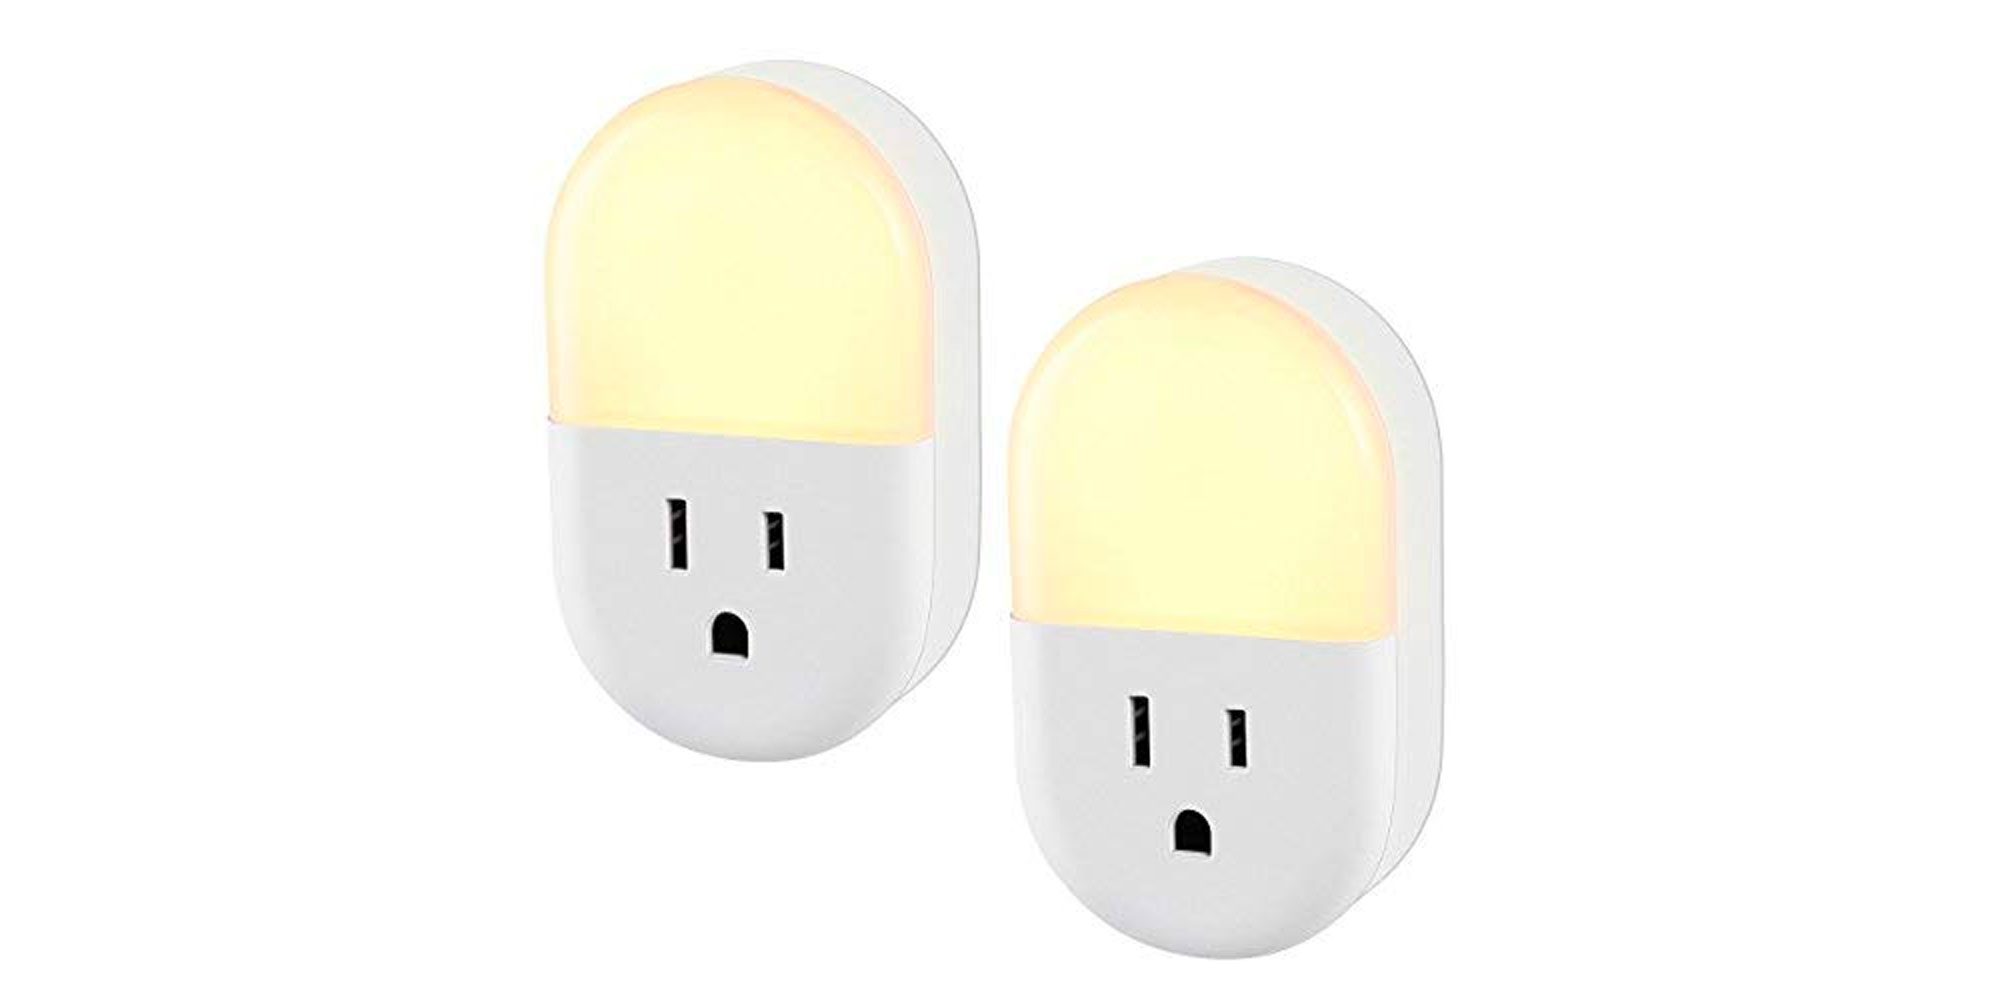 Treatlife Smart Plug Works with Alexa and Google Home, 4Pack